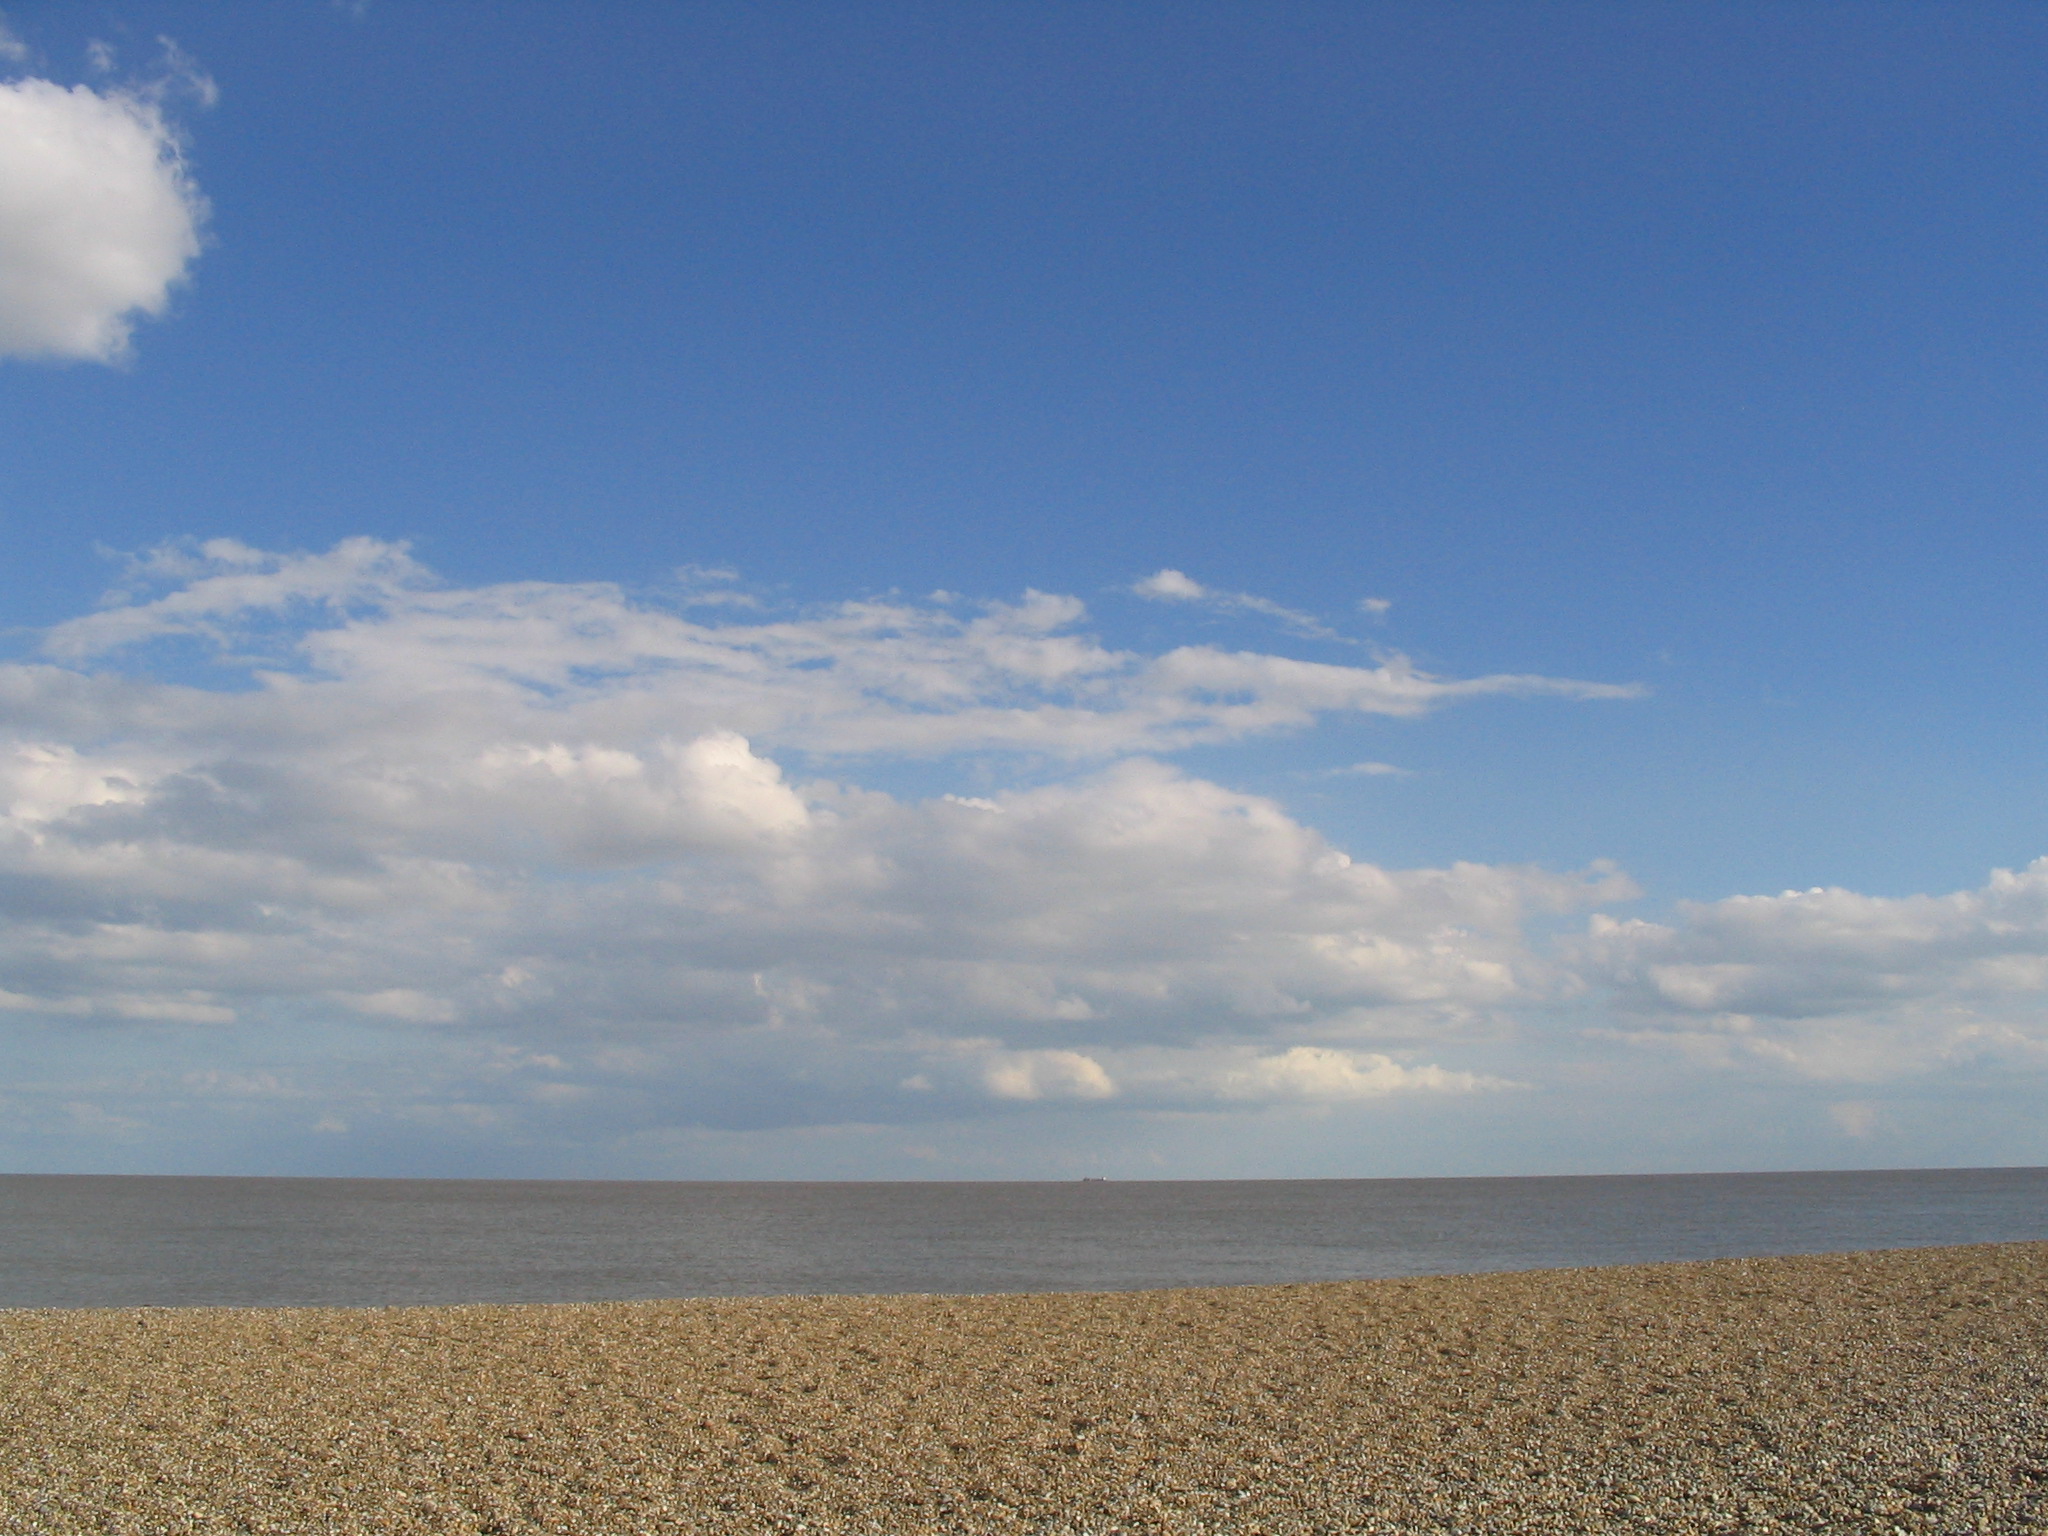 Aldeburgh beach looking out to see on a sunny day